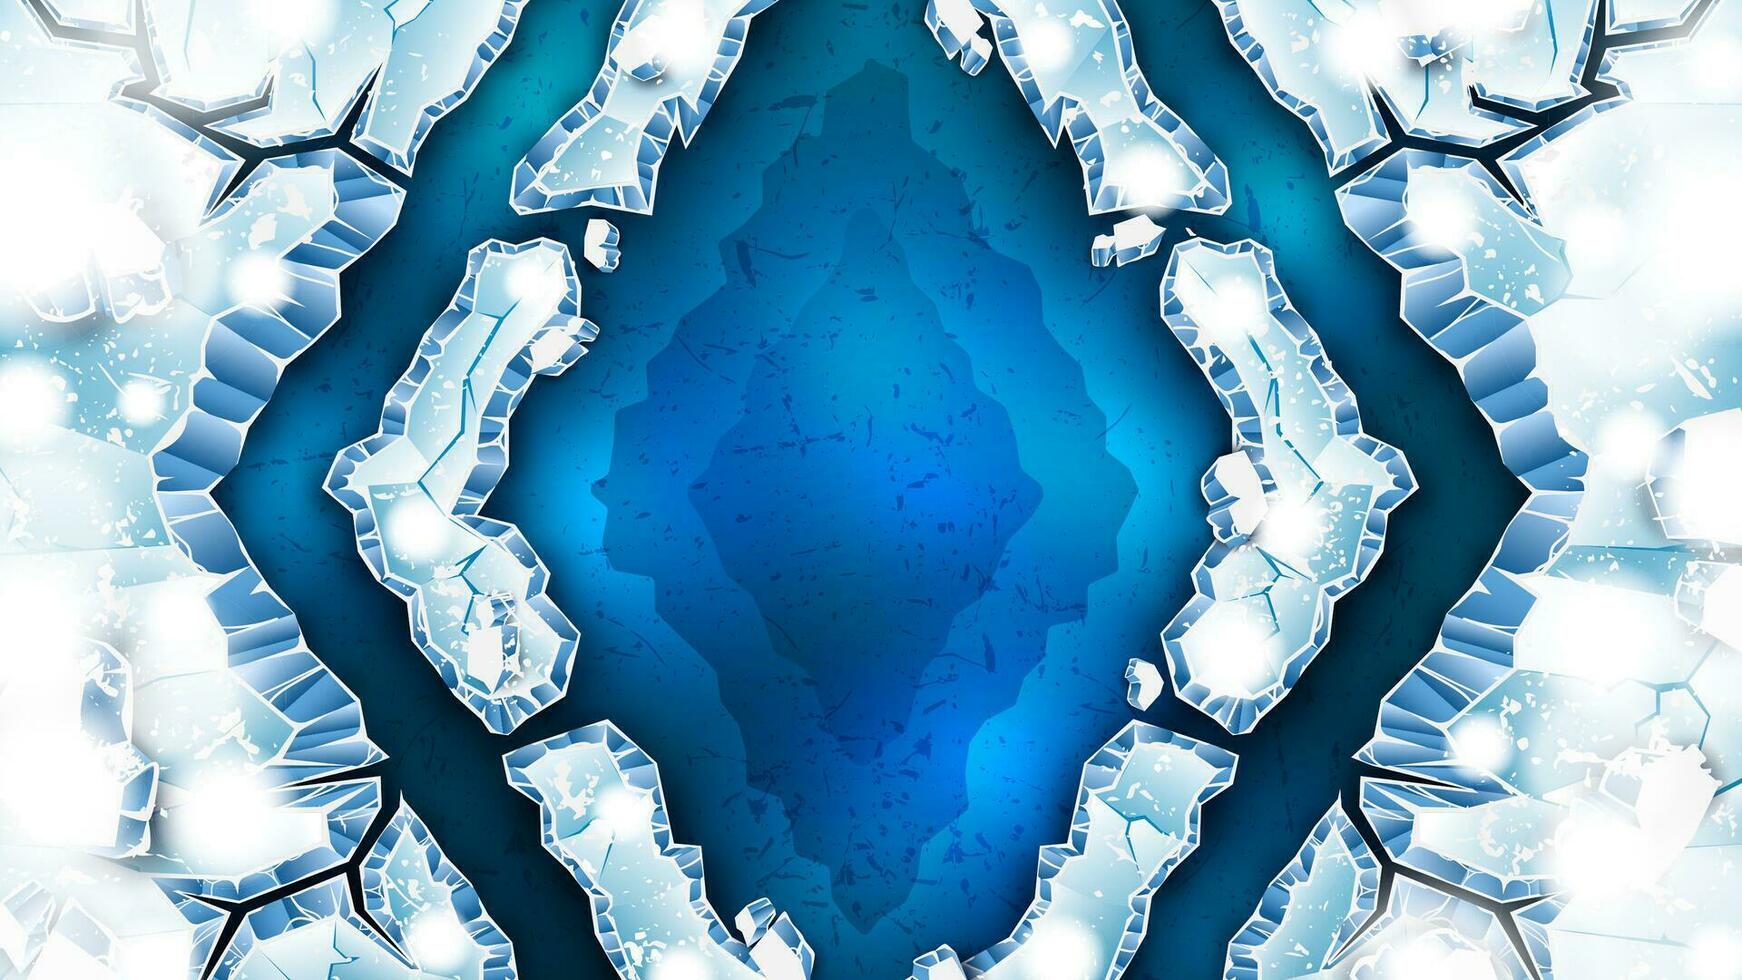 Rhombus Shaped Ice Cracks As a Winter Background vector